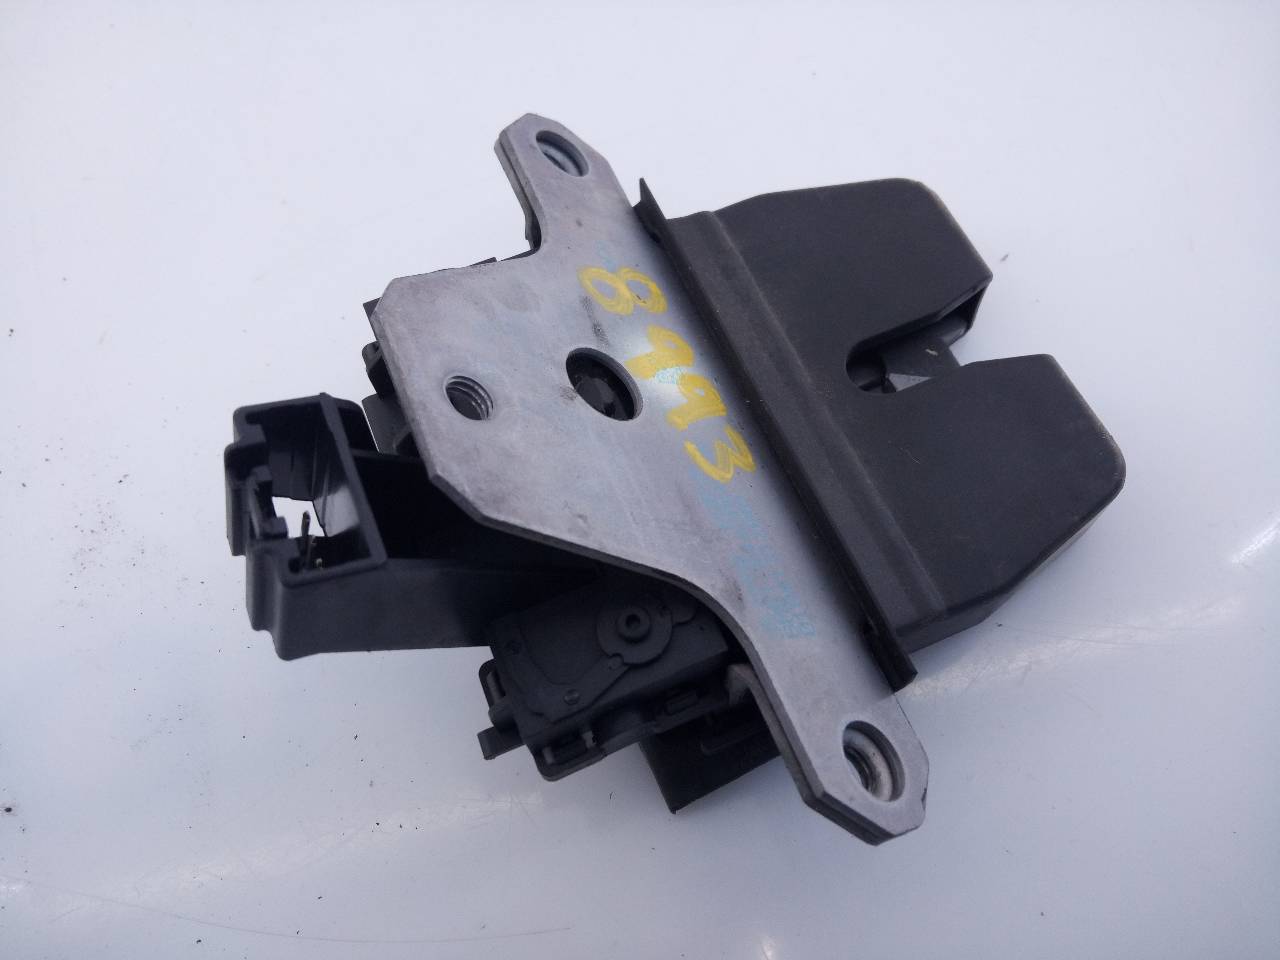 FORD C-Max 1 generation (2003-2010) Tailgate Boot Lock 8M51R442A66, E2-B3-3-2 18721551